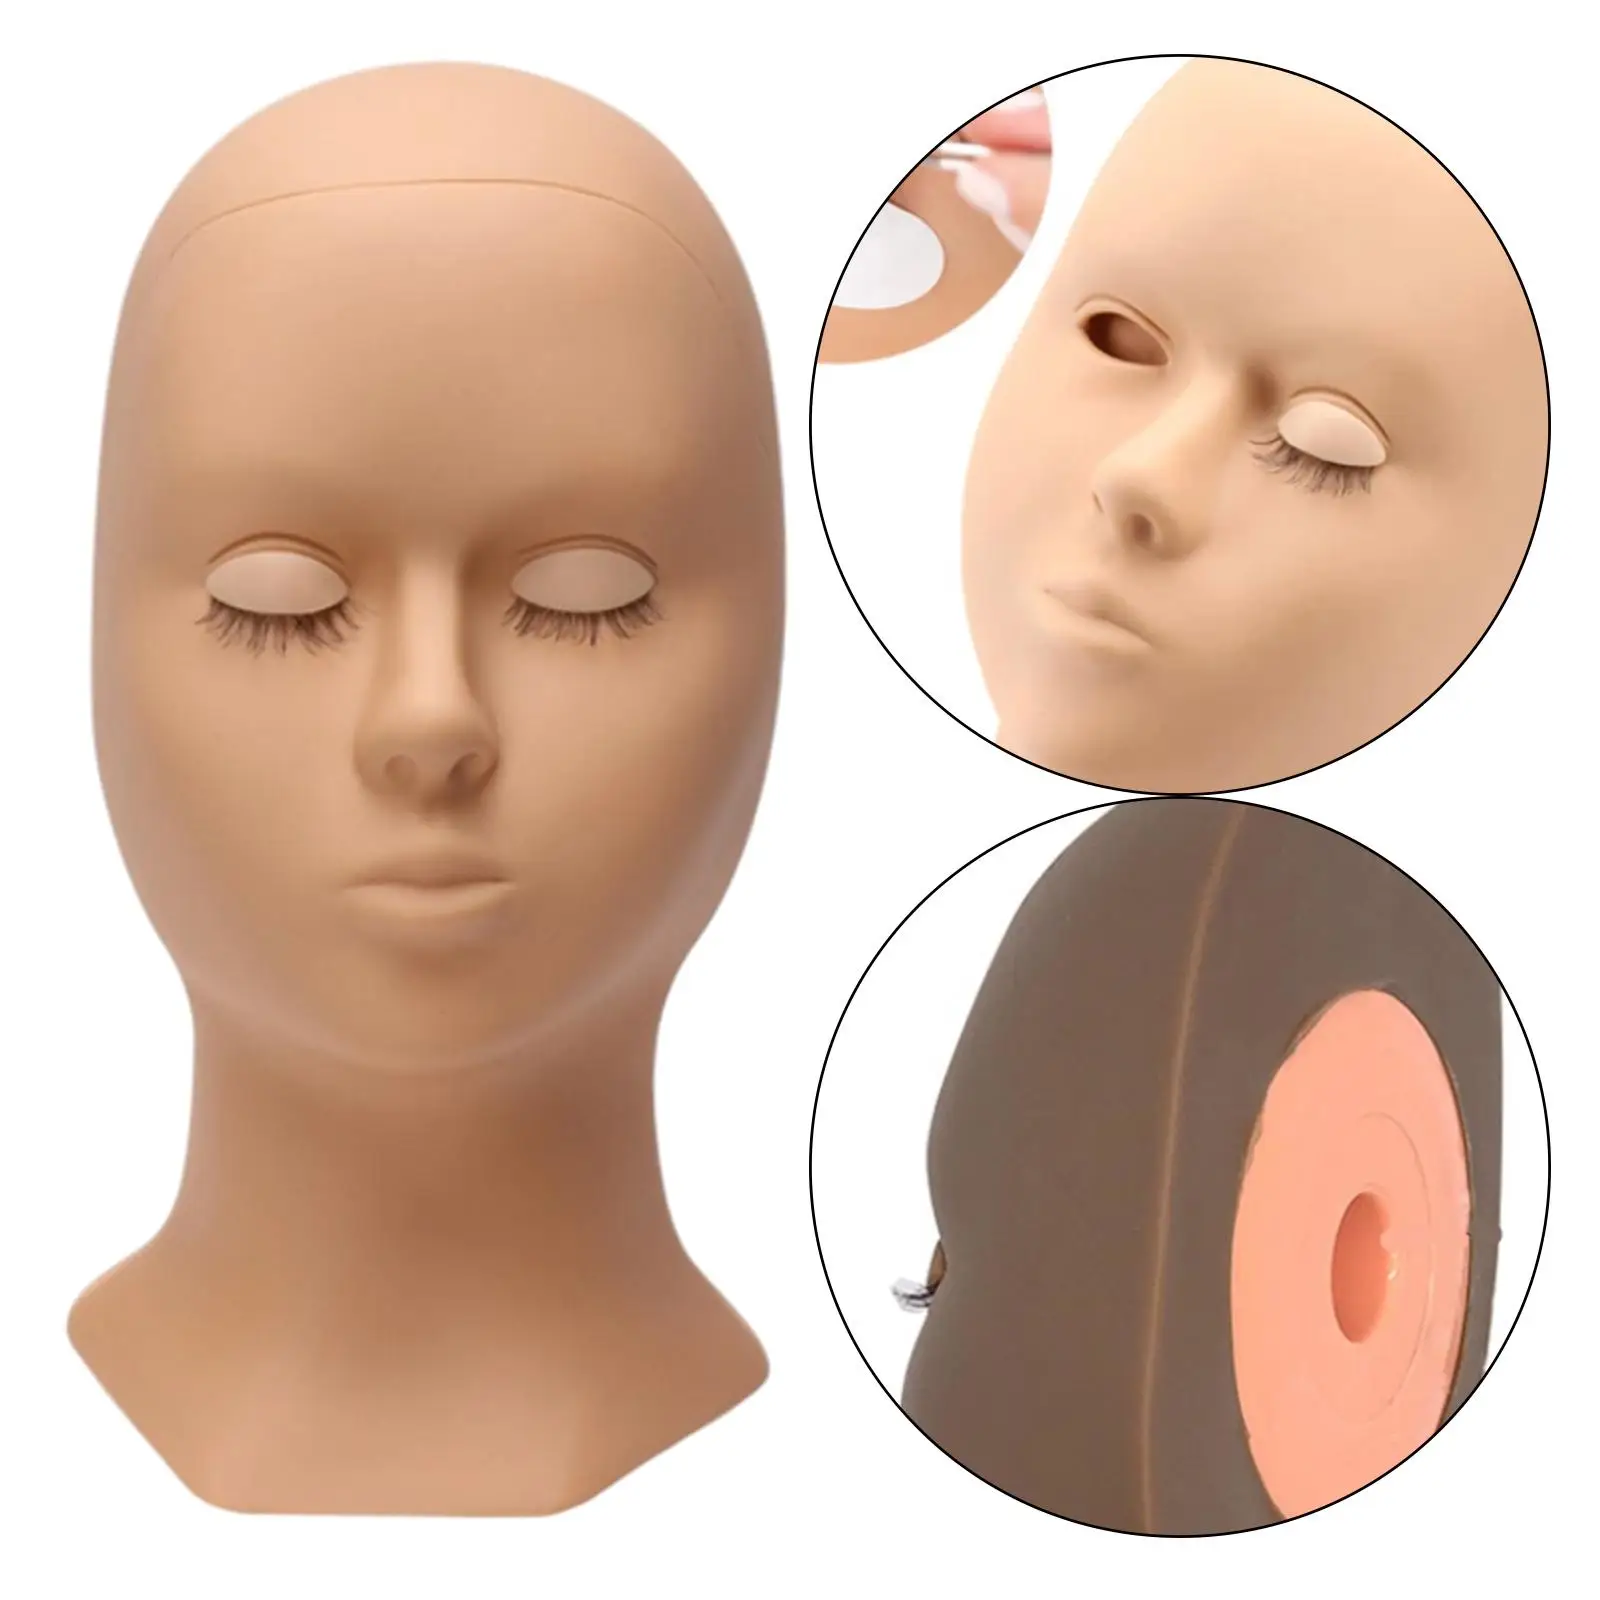 Practice Head Model Replaced Eyelids Eyelash Extension for Use